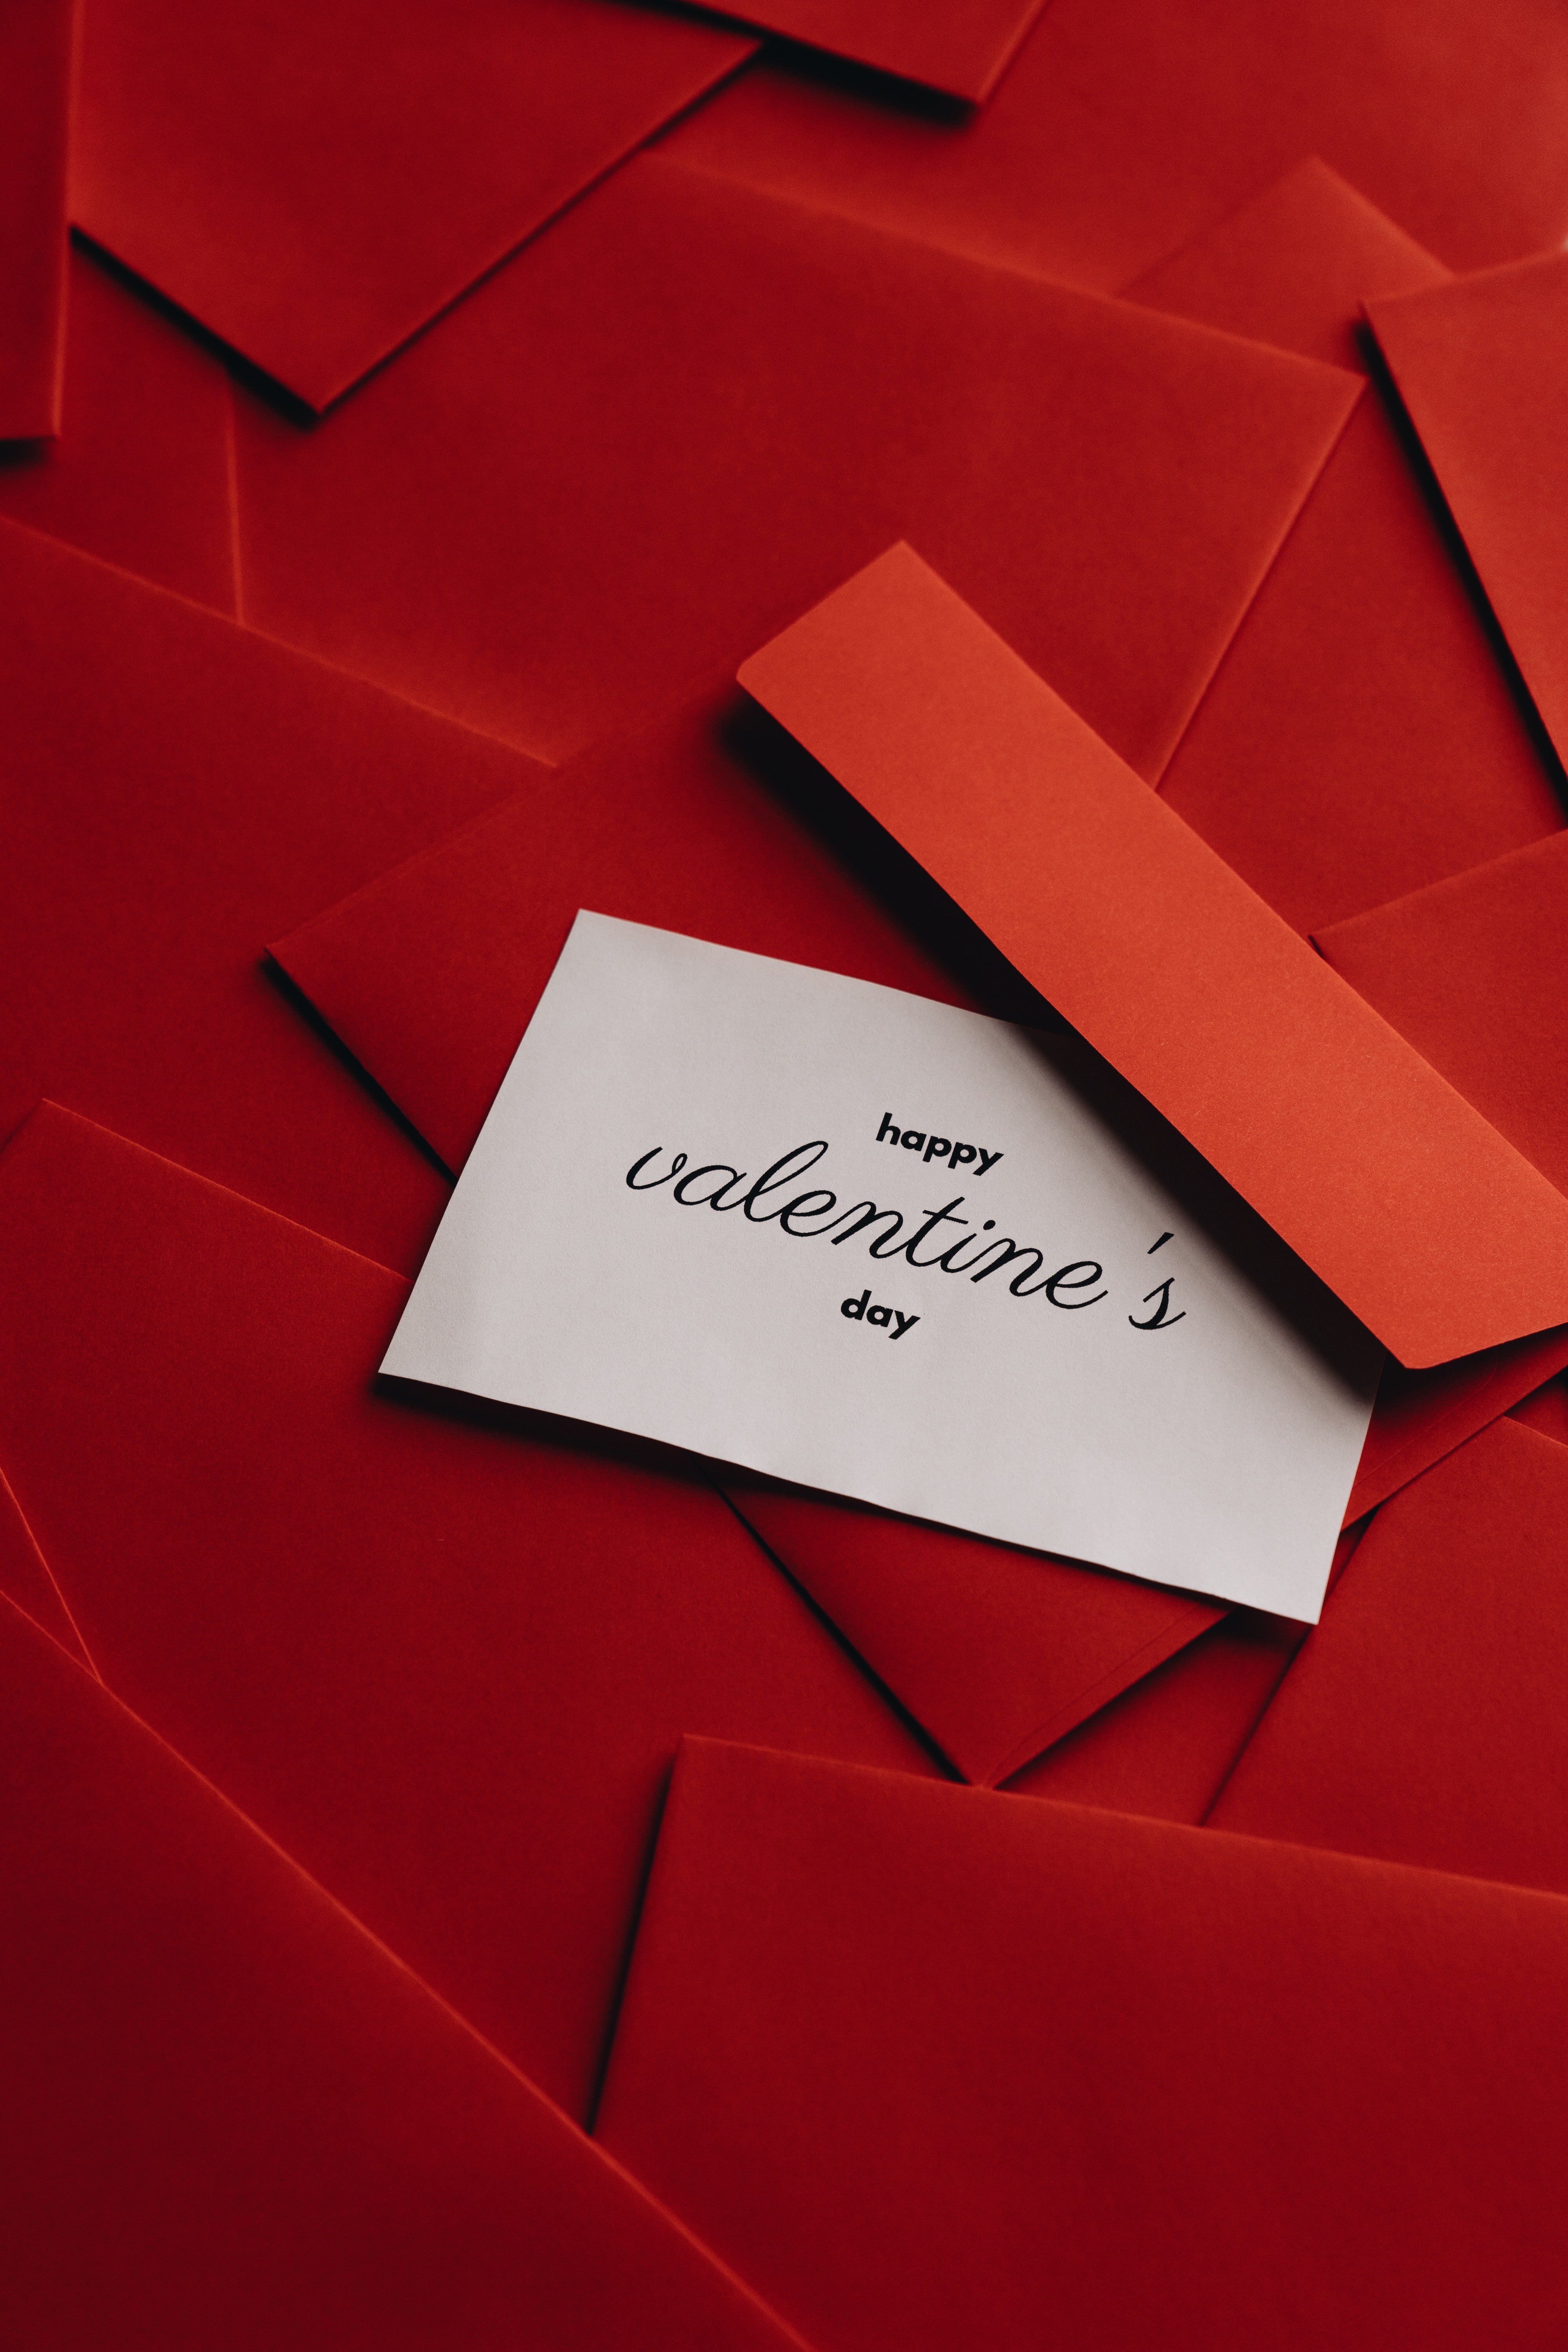 A white Valentine's note ontop of red envelopes. | Photo: Pexels.